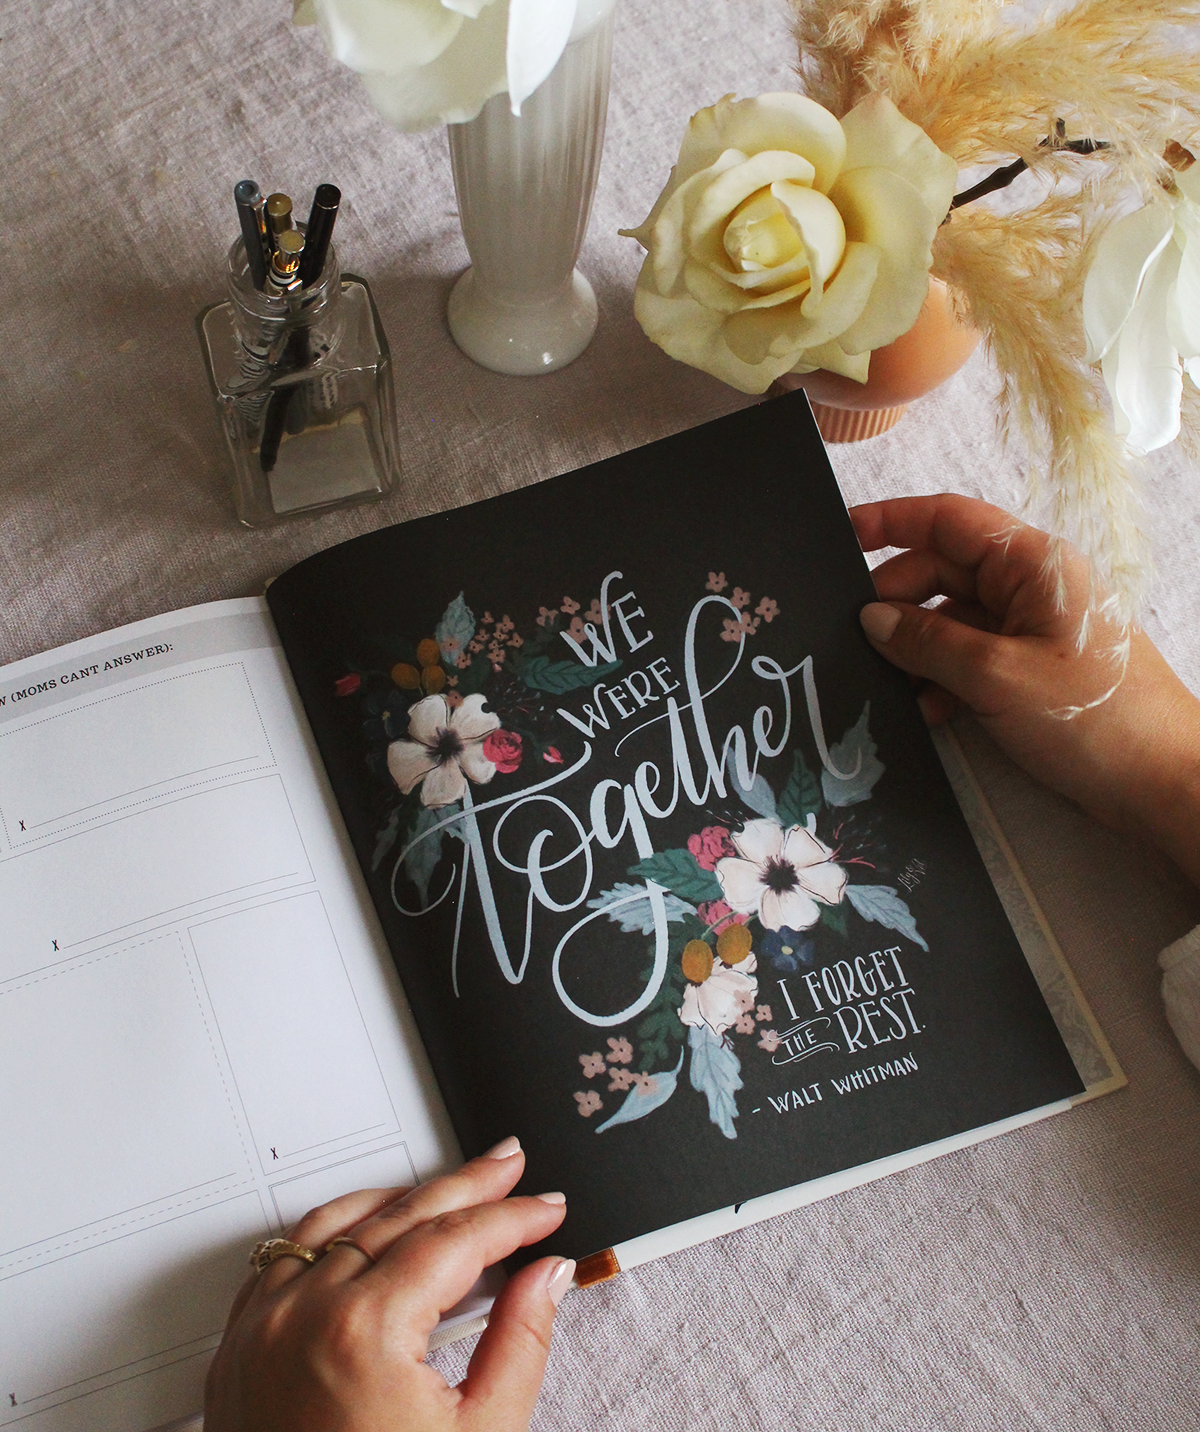 The Lily & Val Wedding Guestbook is an interactive, sentimental take on the traditional wedding guestbook featuring heartfelt prompts for your guests to fill out